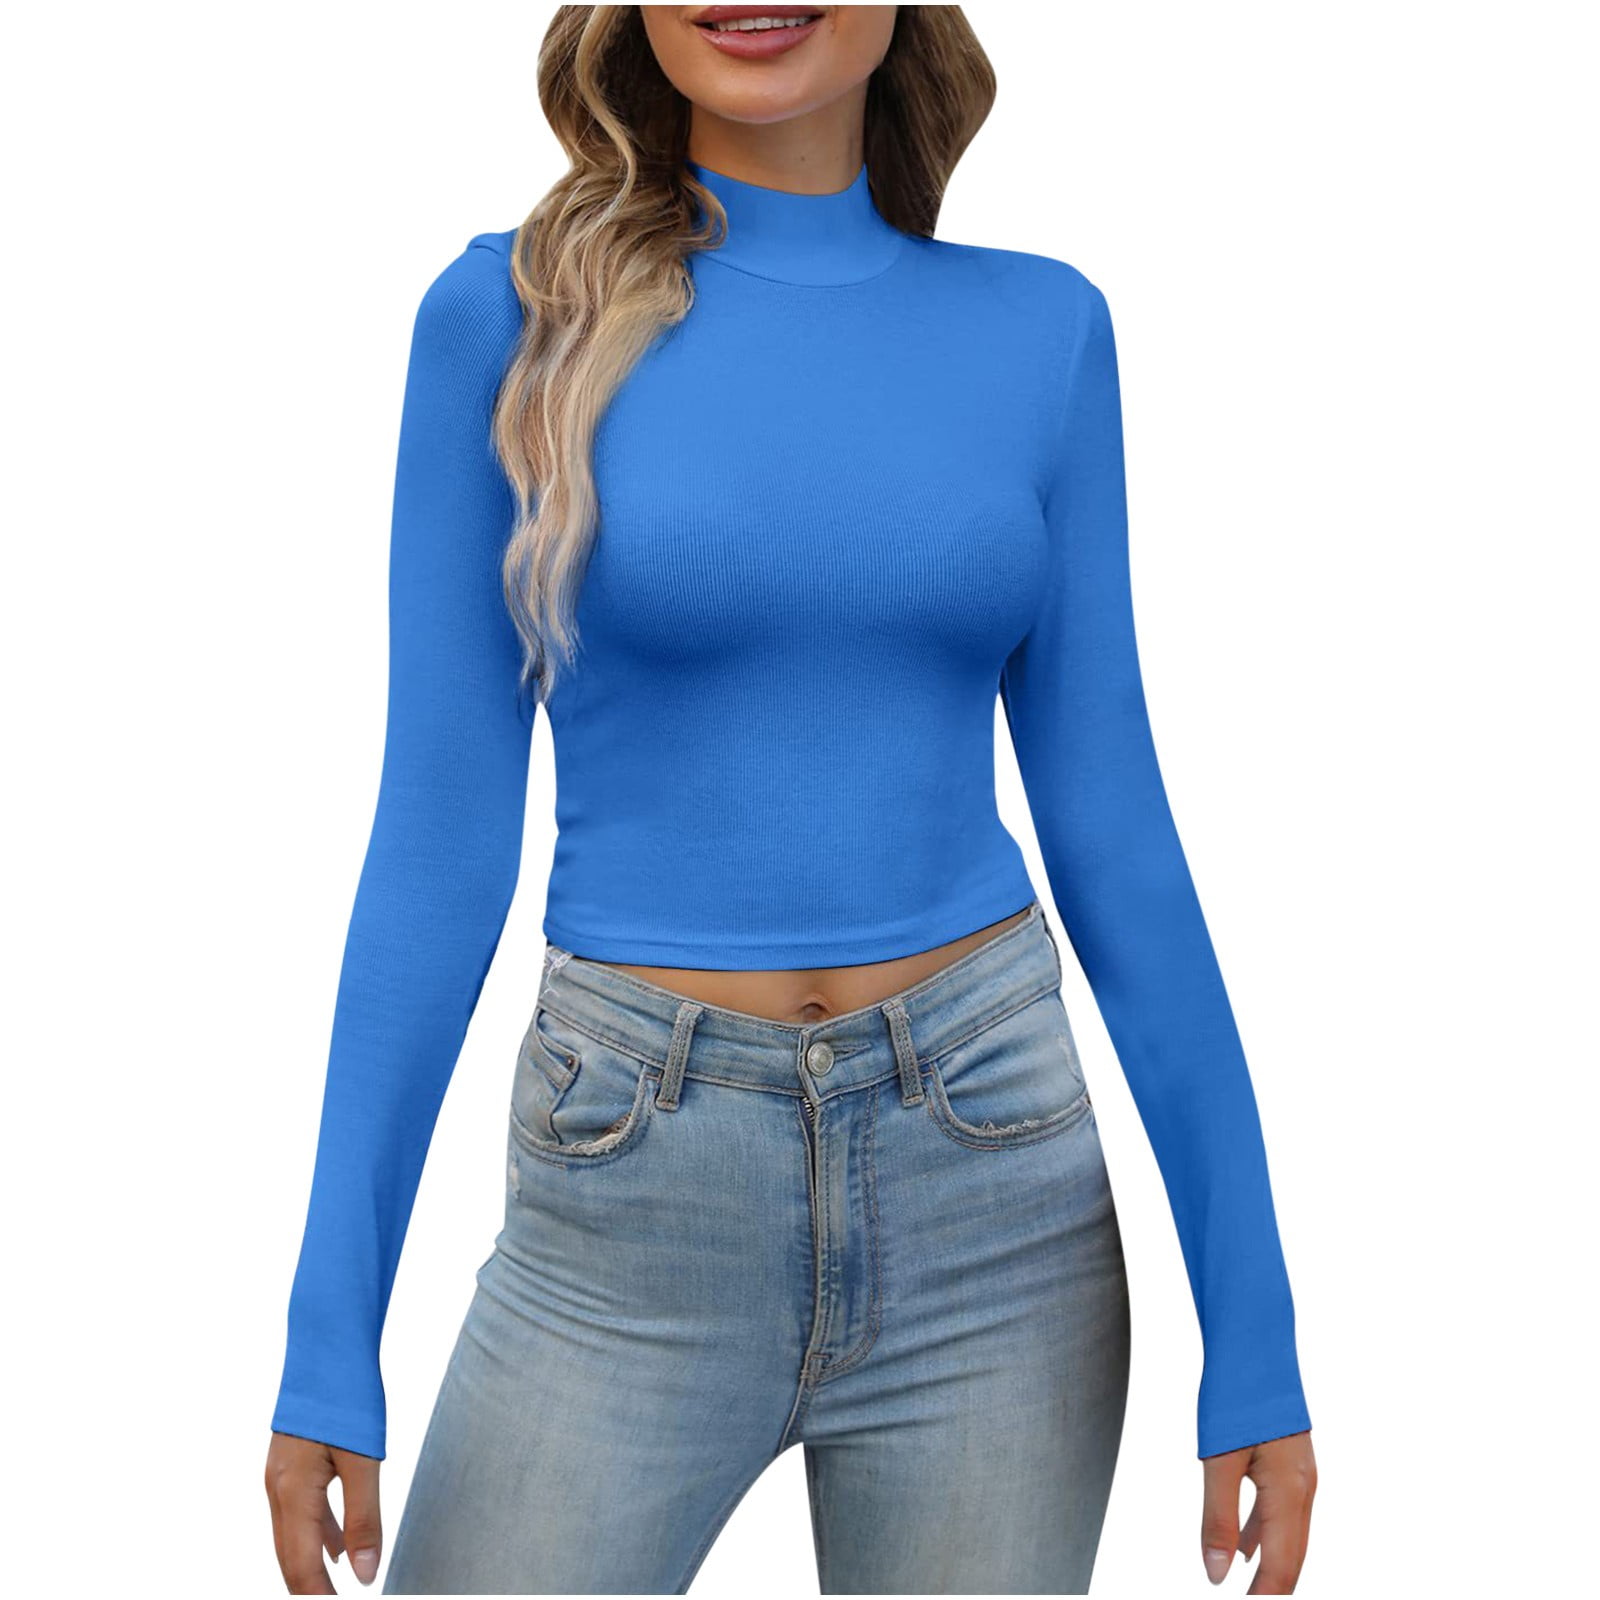 ZXHACSJ Women's Crop Top Long Sleeve Shirts Knit Slim Fitted Screw Thread  Casual Layer Tee Tops Blue L